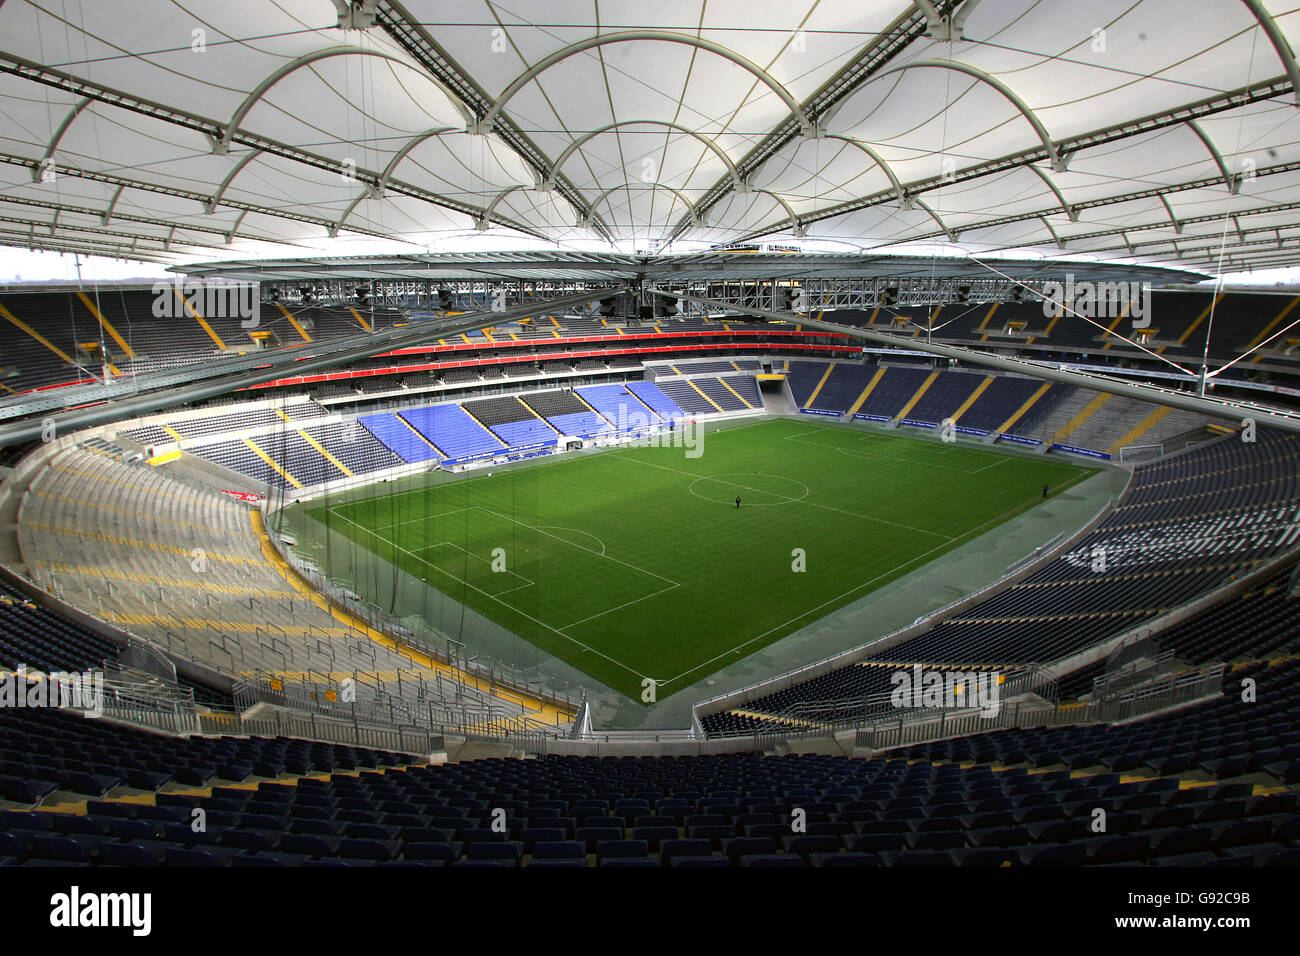 Soccer - FIFA World Cup 2006 Stadiums - Commerzbank-Arena - Frankfurt. General view of the Commerzbank-Arena Stock Photo